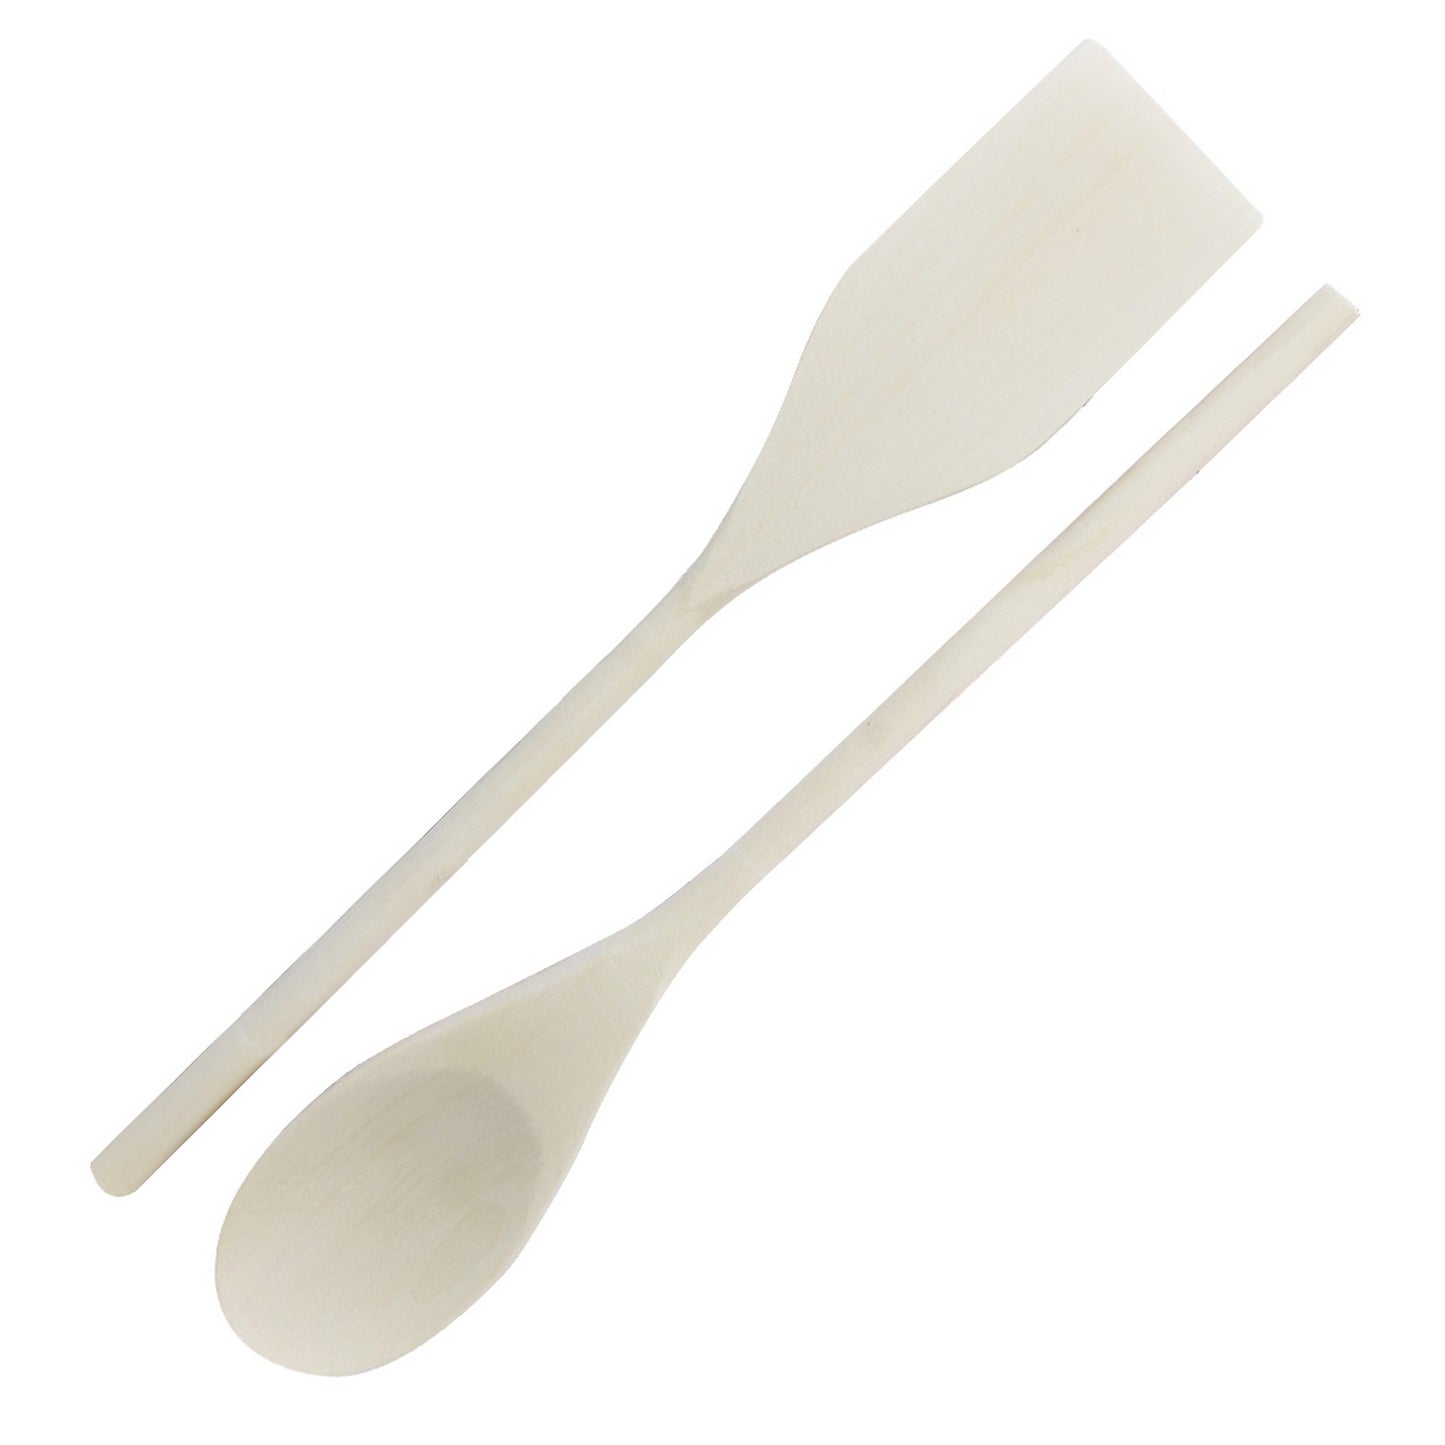 
                  
                    Bene Casa 2-piece wooden spoon set, wooden spatula and spoon, easy clean, long 14-inch spoon, non-stick coating spoon and spatula
                  
                